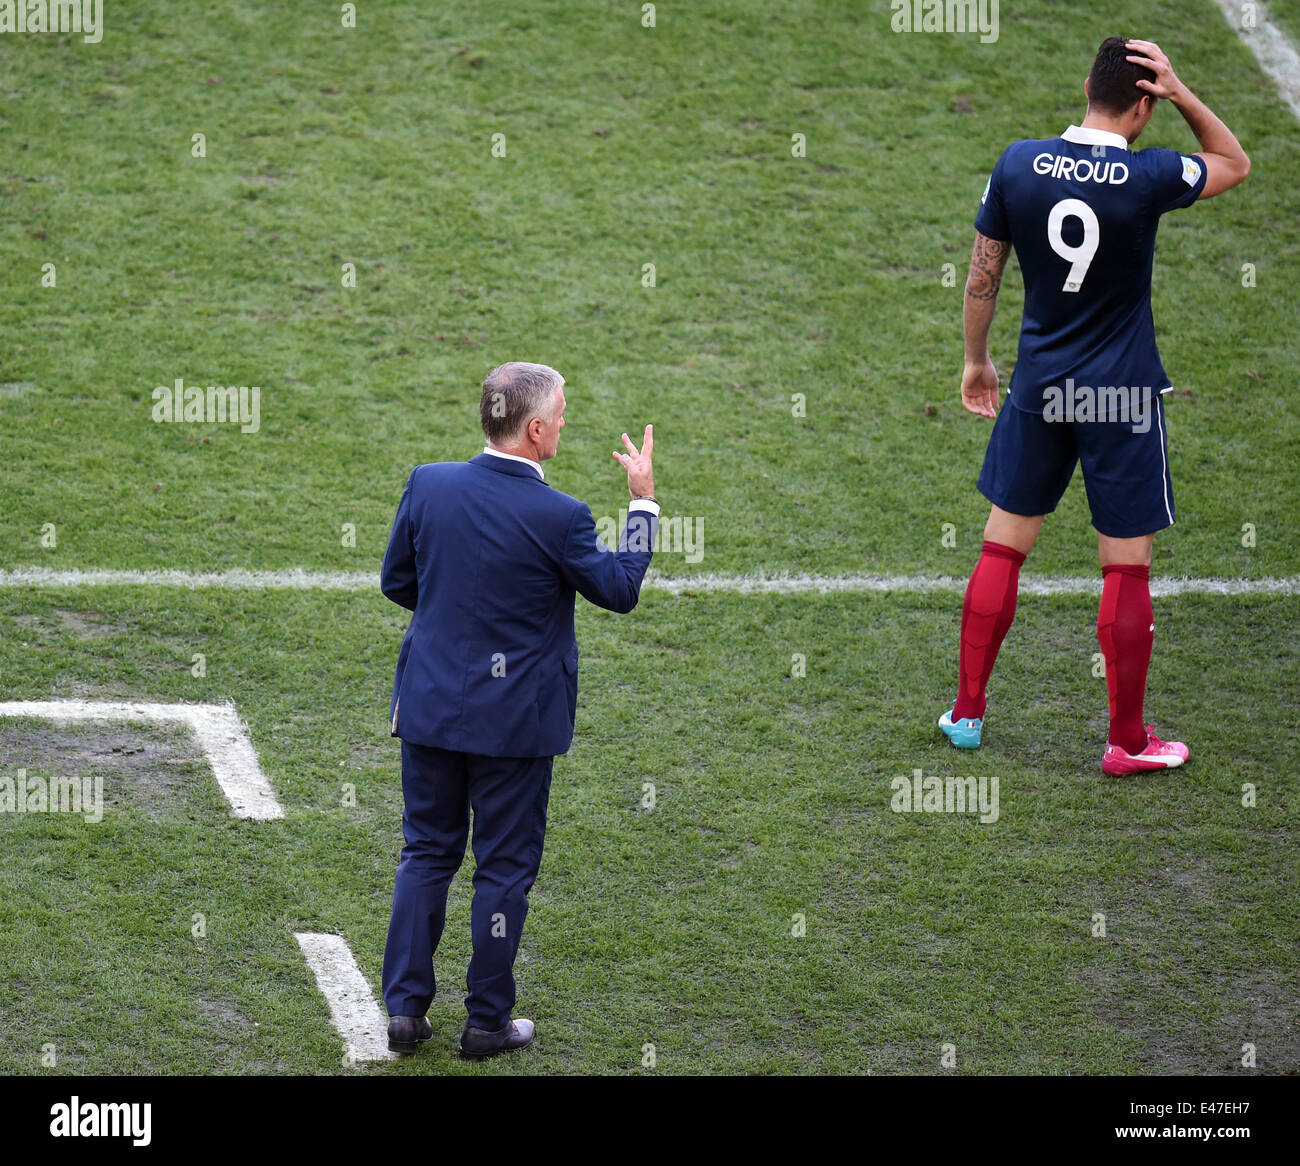 Rio de Janeiro, Brazil. 04th July, 2014. Head coch Didier Deschamps of France gestures next to Olivier Giroud (R) of France during the FIFA World Cup 2014 quarter final soccer match between France and Germany at Estadio do Maracana in Rio de Janeiro, Brazil, 04 July 2014. Photo: Marcus Brandt/dpa/Alamy Live News Stock Photo